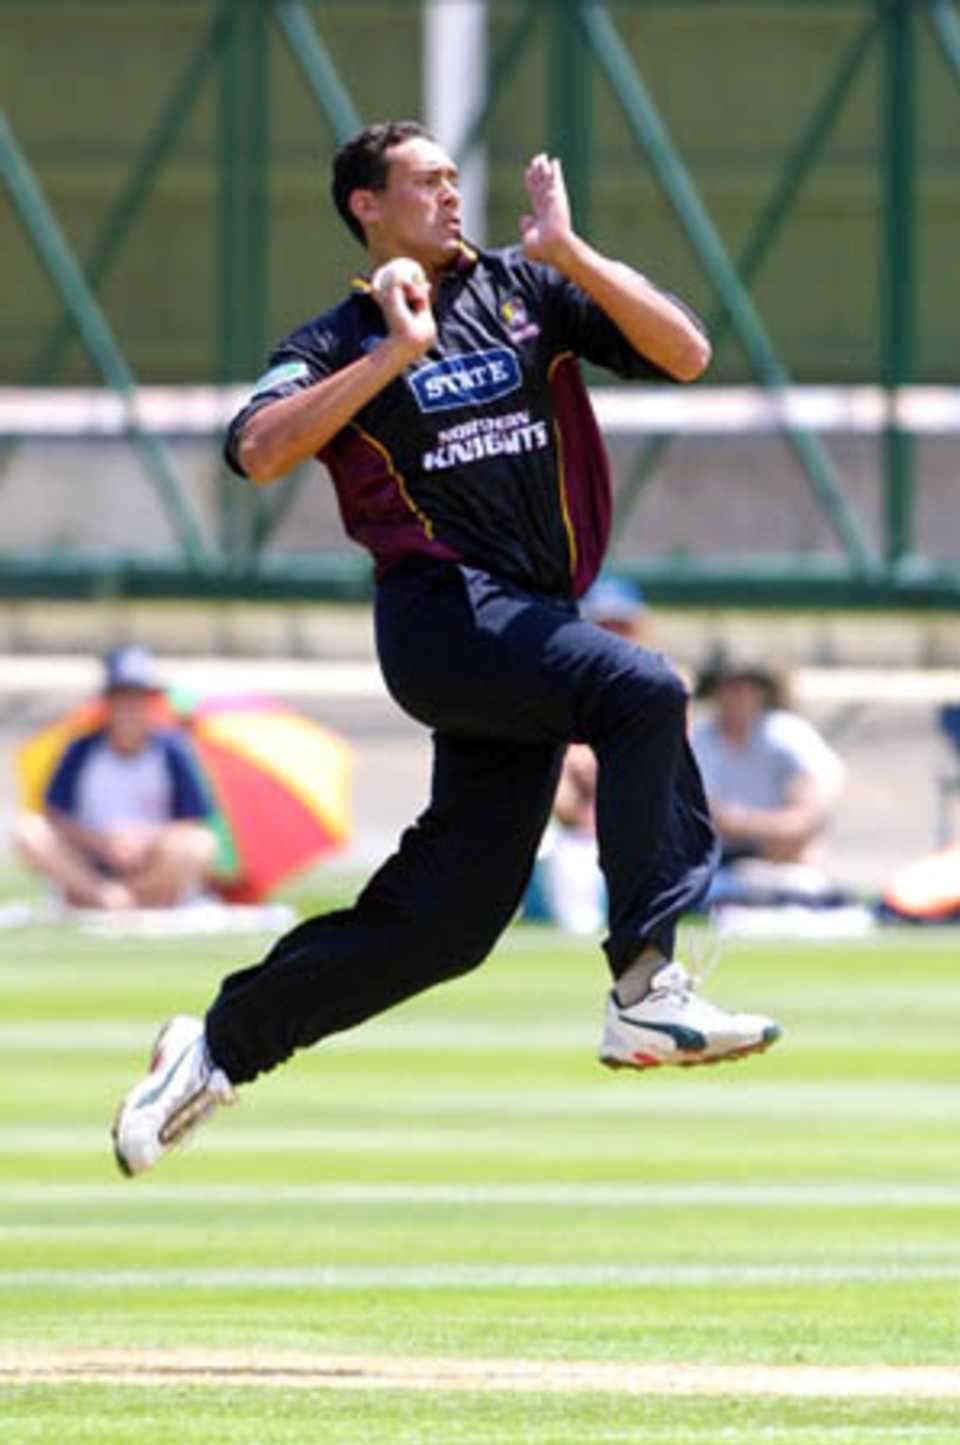 Northern Districts bowler Daryl Tuffey delivers a ball during his spell of 2-43 from seven overs. State Shield: Auckland v Northern Districts at Eden Park Outer Oval, Auckland, 2 Jan 2002 (2 January 2002).